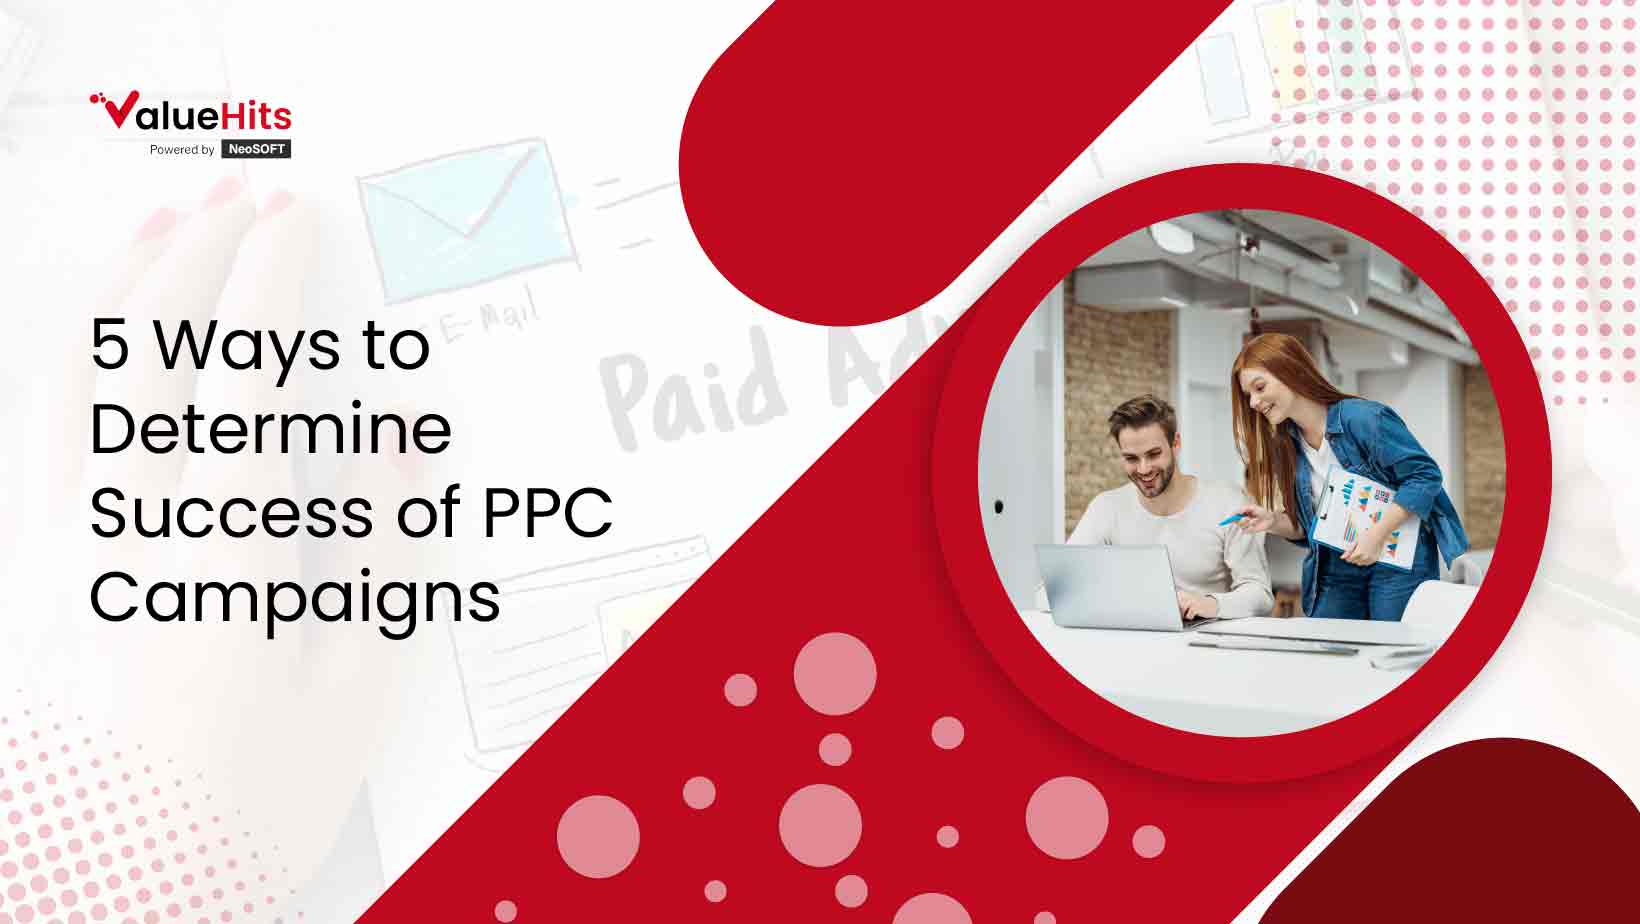 5 Ways to Determine Success of PPC Campaigns